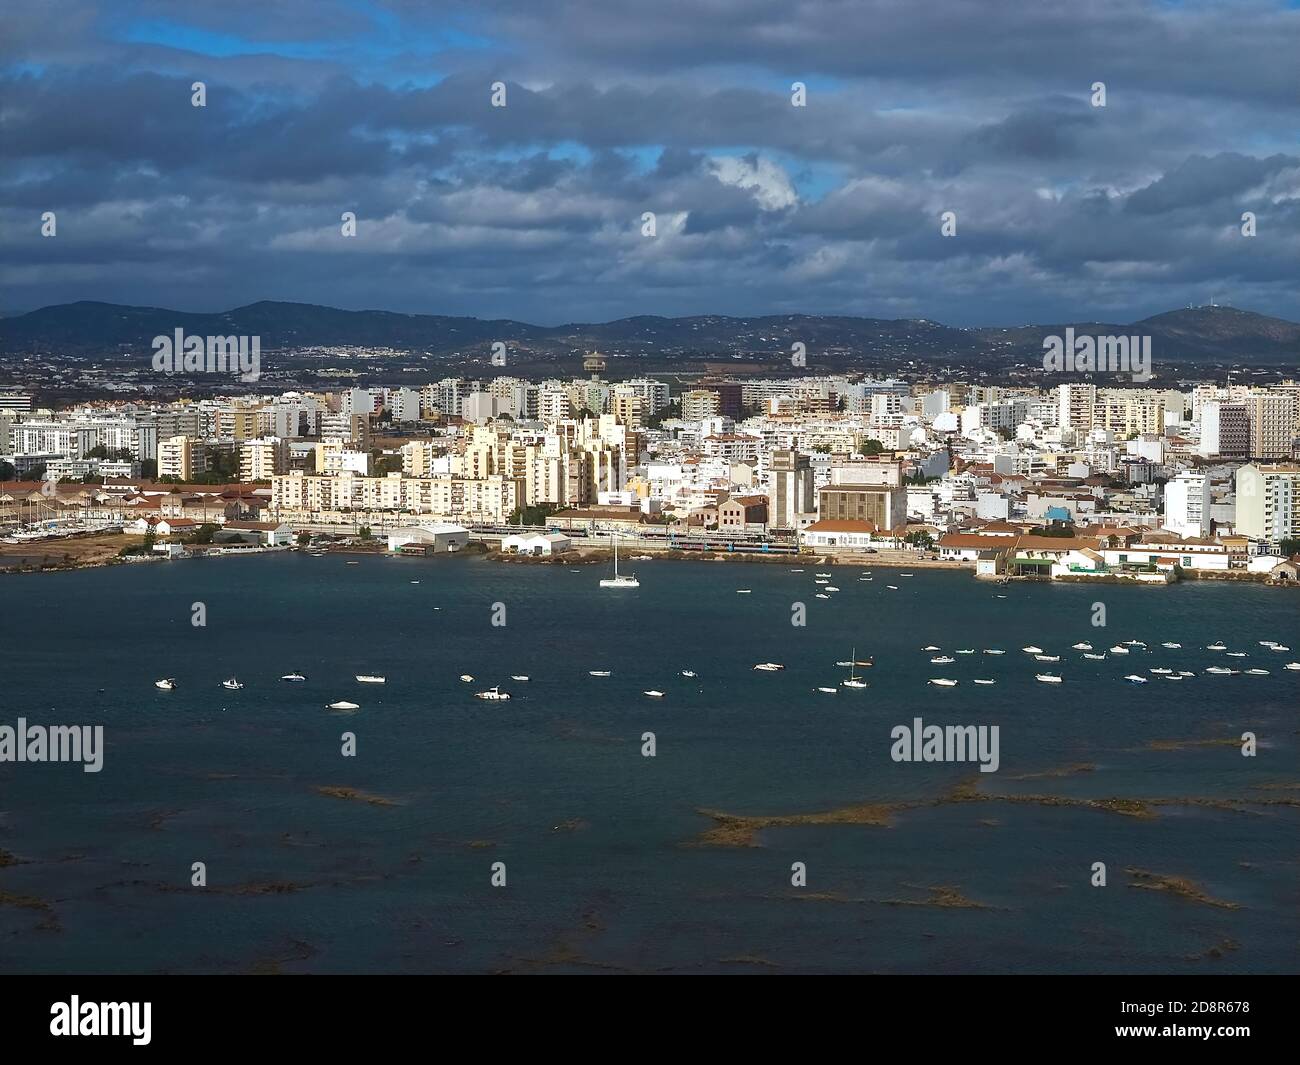 Aerial view of the Cityscape of Faro at the Algarve coast in Portugal seen from an airplane Stock Photo